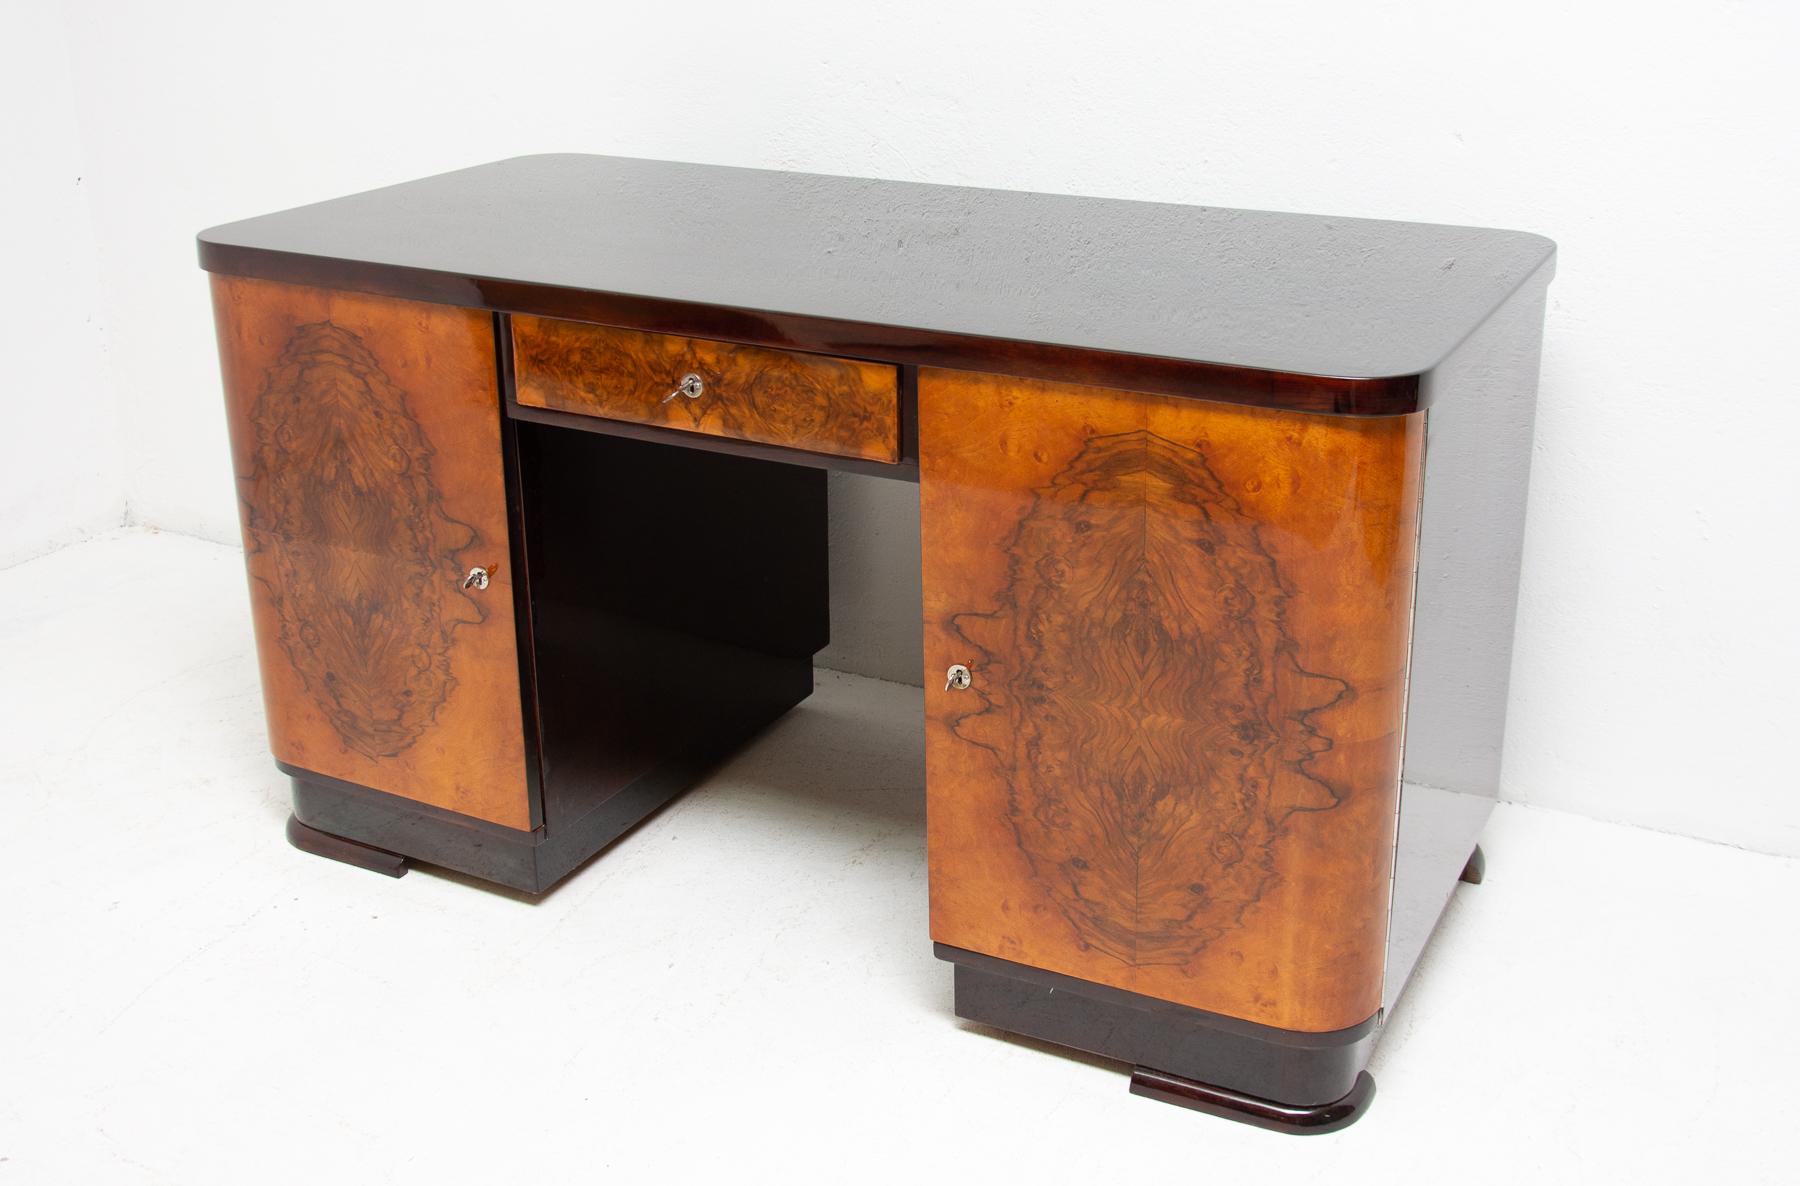 This massive Art Deco writing desk was made in Bohemia in the 1930s. It´s made of solid wood and features a walnut veneer inlaid. The top is made of oakwood. It includes one drawer and four extended shelves. The desk is in excellent condition due to